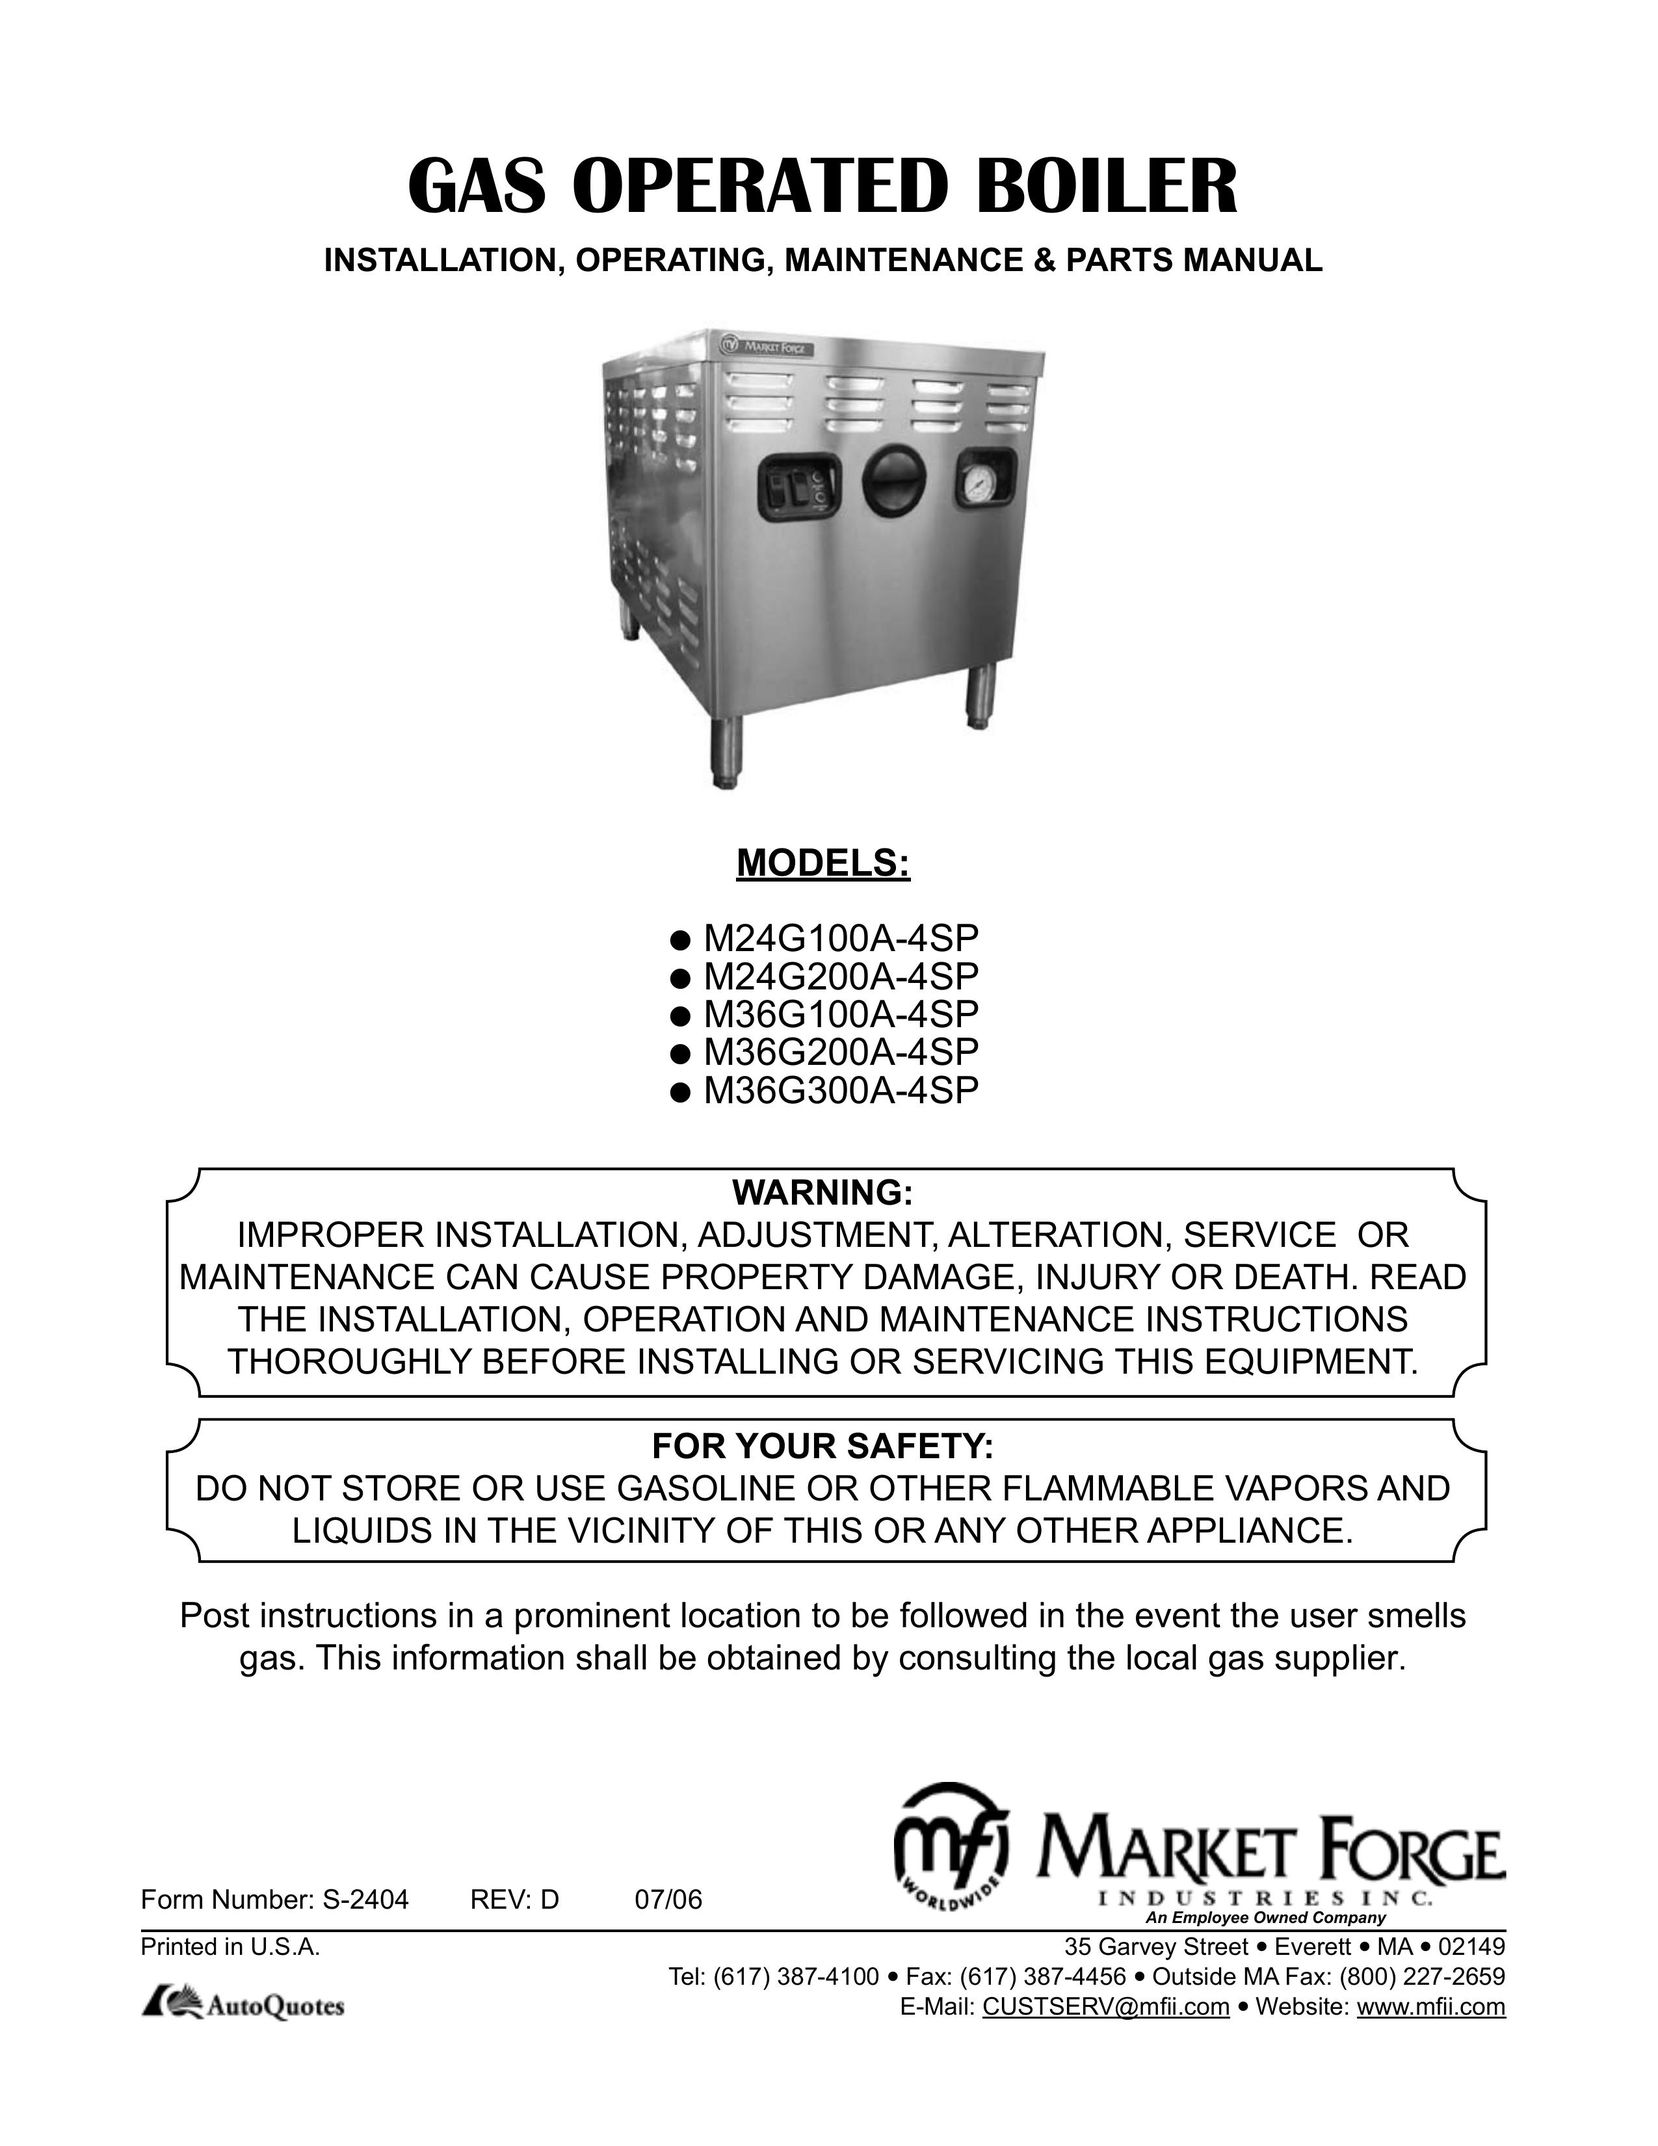 Market Forge Industries M36G200A-4SP Boiler User Manual